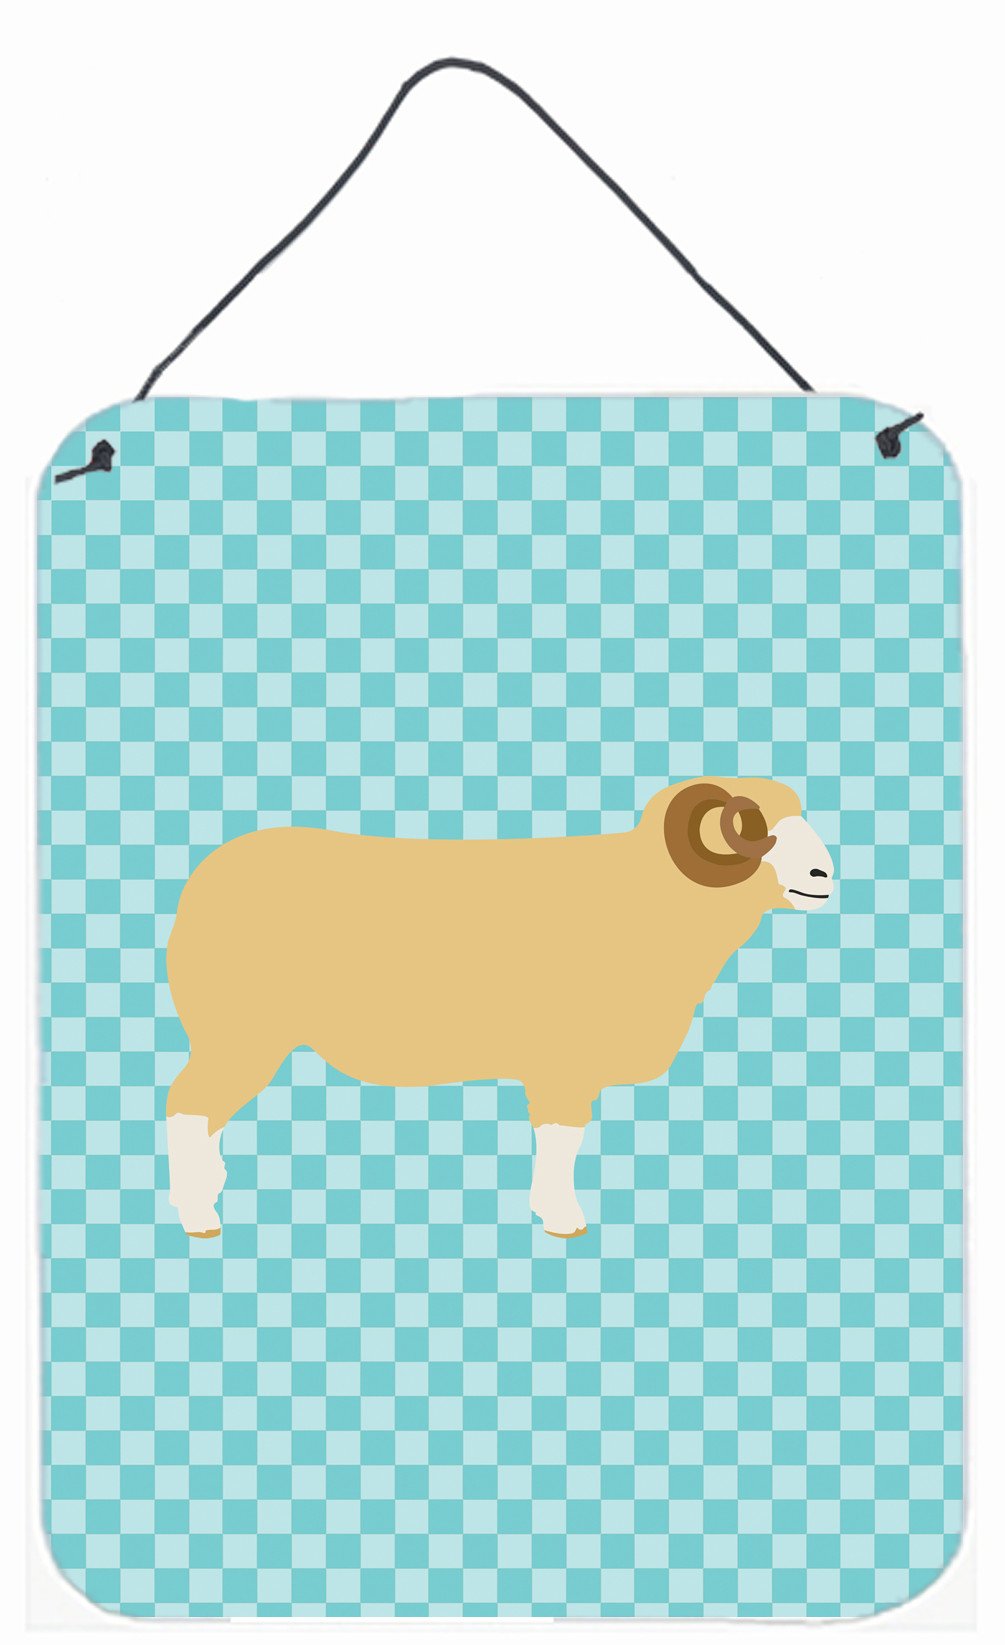 Horned Dorset Sheep Blue Check Wall or Door Hanging Prints BB8154DS1216 by Caroline's Treasures